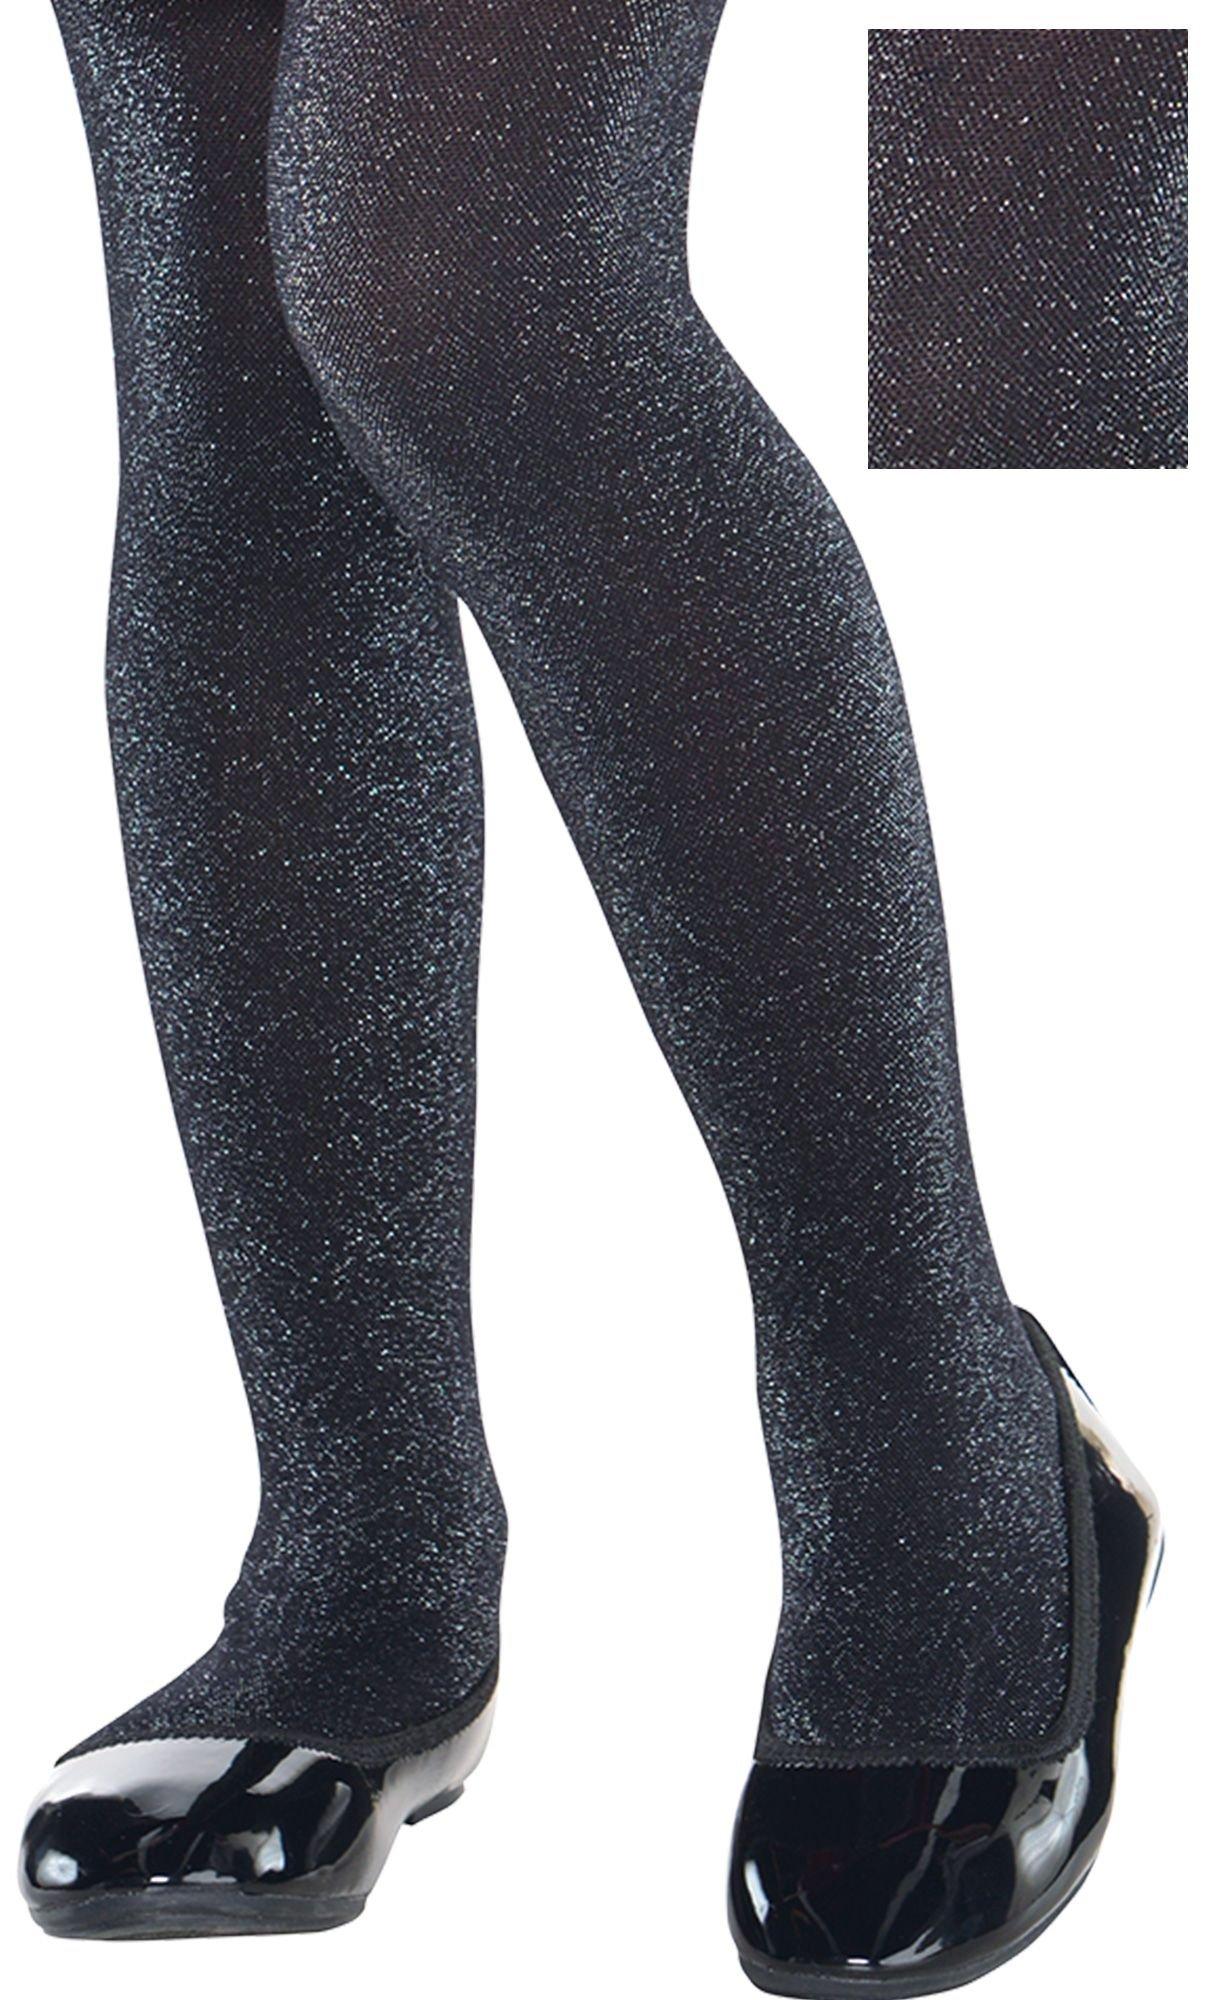 Gold and black sparkly tights New Years Eve  Sparkly tights, Glitter  fashion, Fashion tights